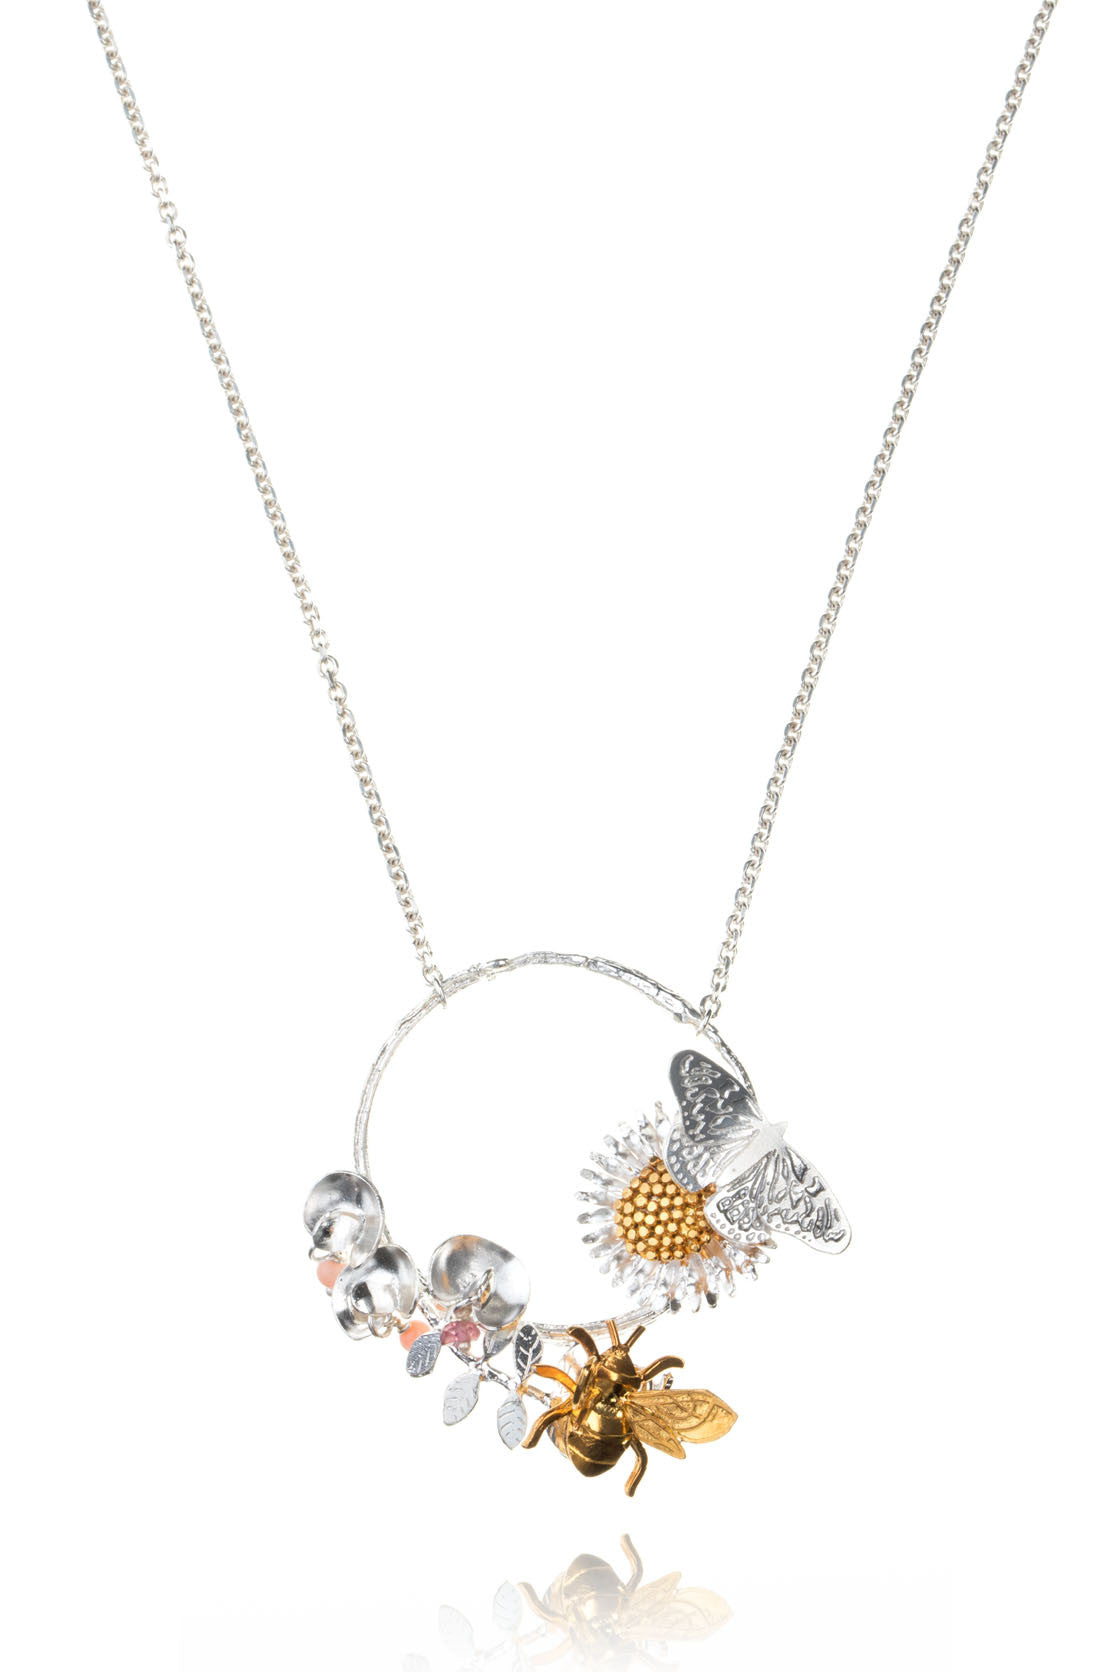 Sweet Pea, Bee, Butterfly And Daisy Statement Necklace in Sterling Silver And Goldplate